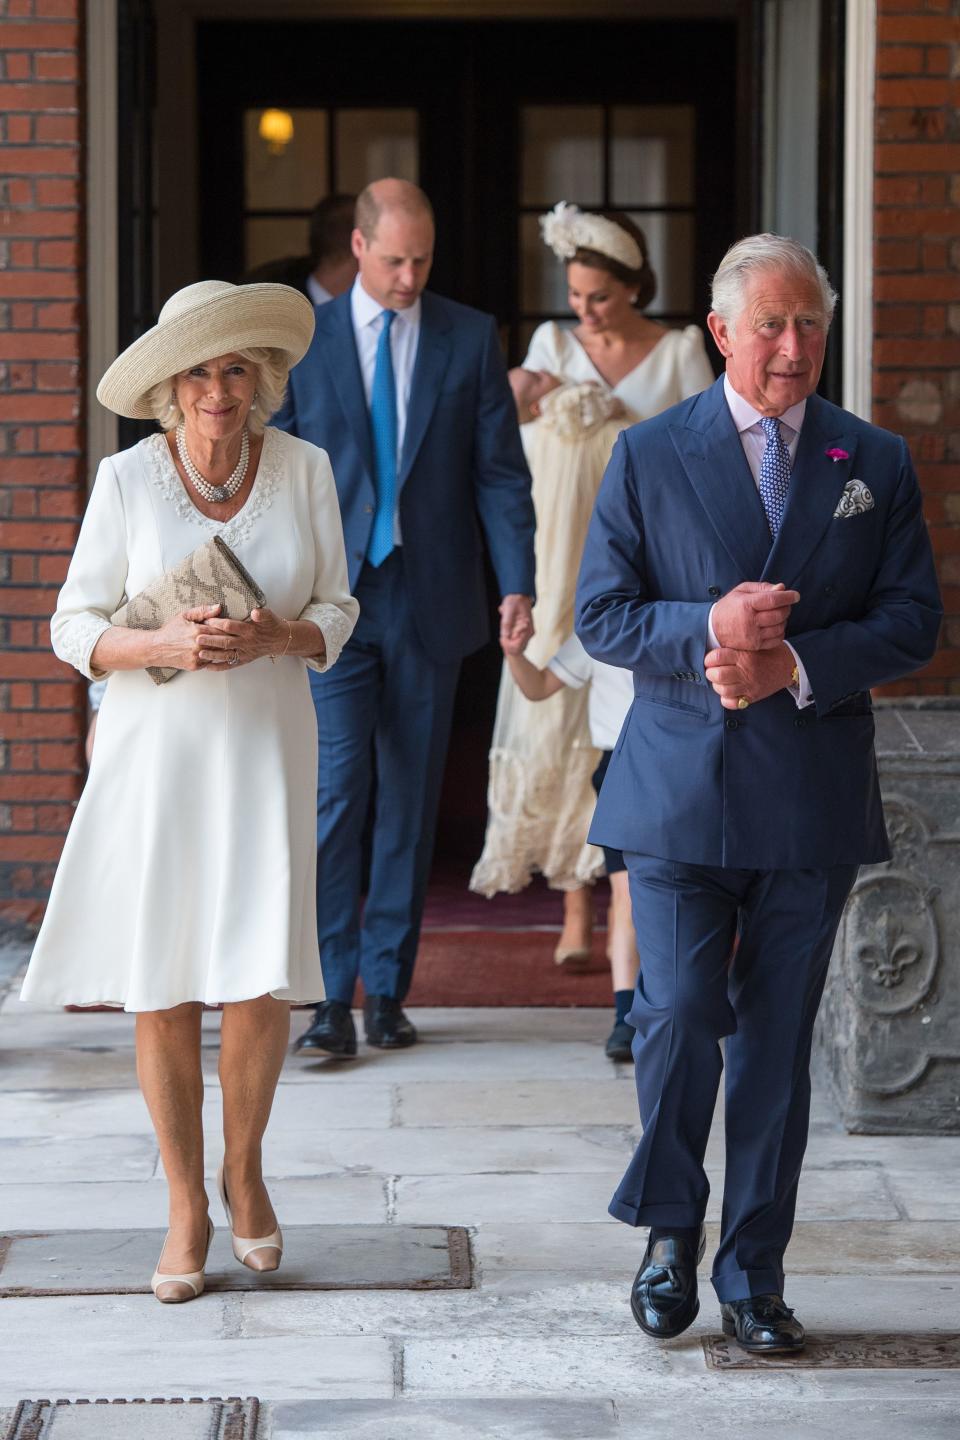 It’s even rumoured that Prince Charles’ wife, Camilla Parker Bowles, has begun to mimic her husband’s demands and brings her own drink with her when she travels, so there’s no fear of either of them being spiked. Photo: Getty Images